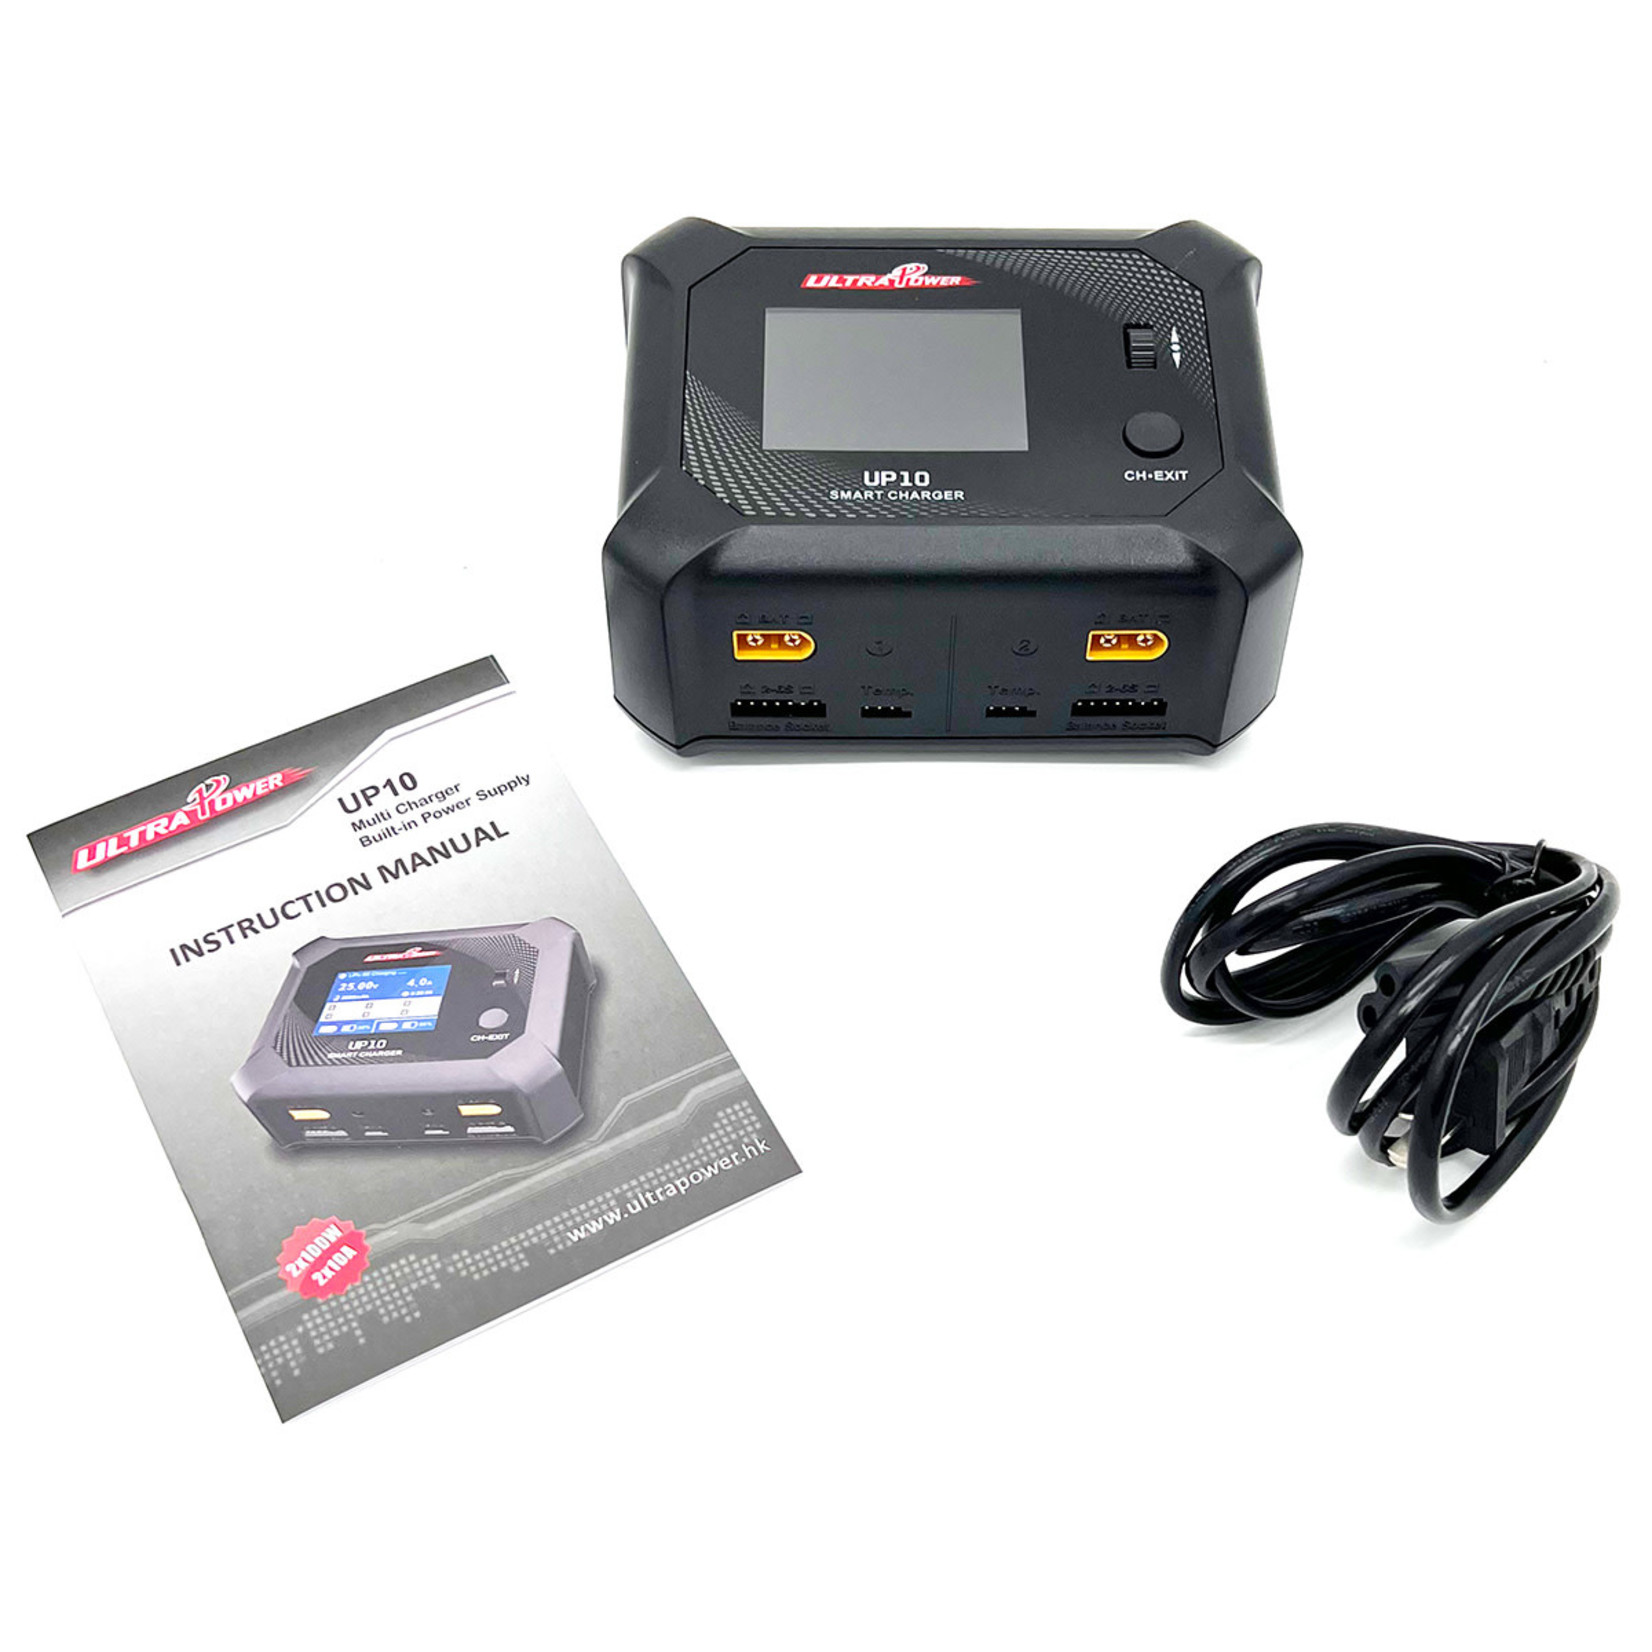 Ultra Power UltraPower UP10 AC 100W/DC 2X100W Dual Port Multi-Chemistry Smart Charger #UP10